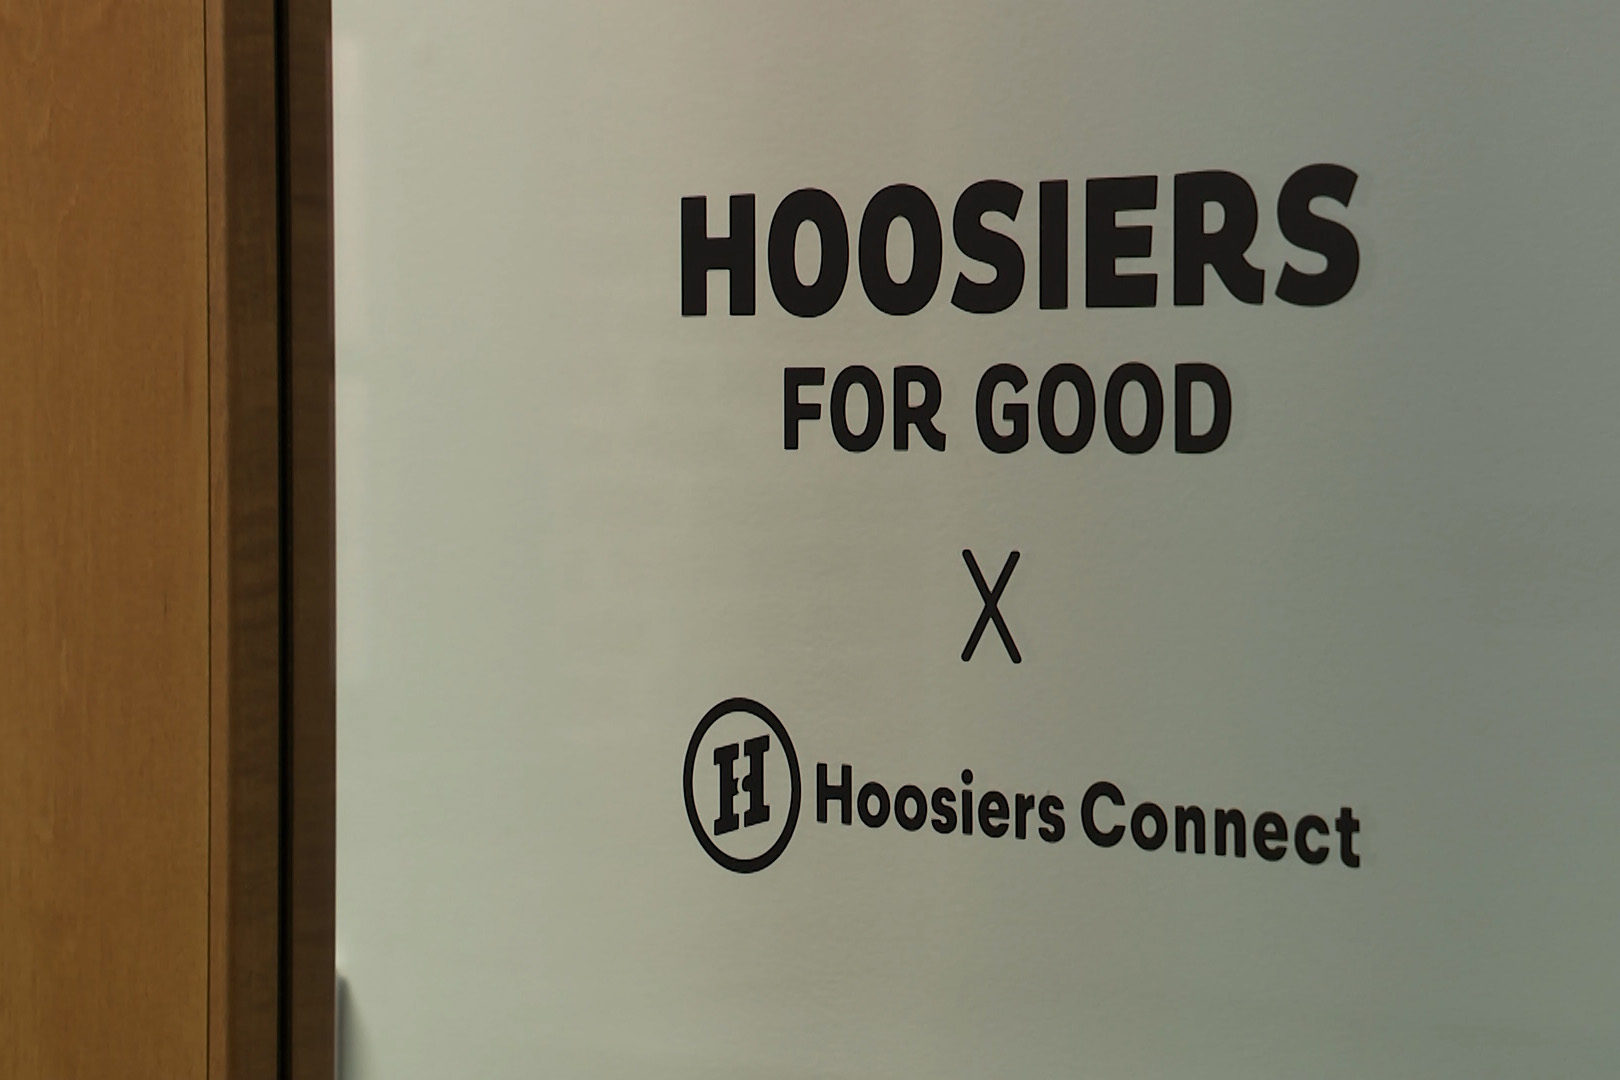 Hoosiers For Good office is located in the Mill.